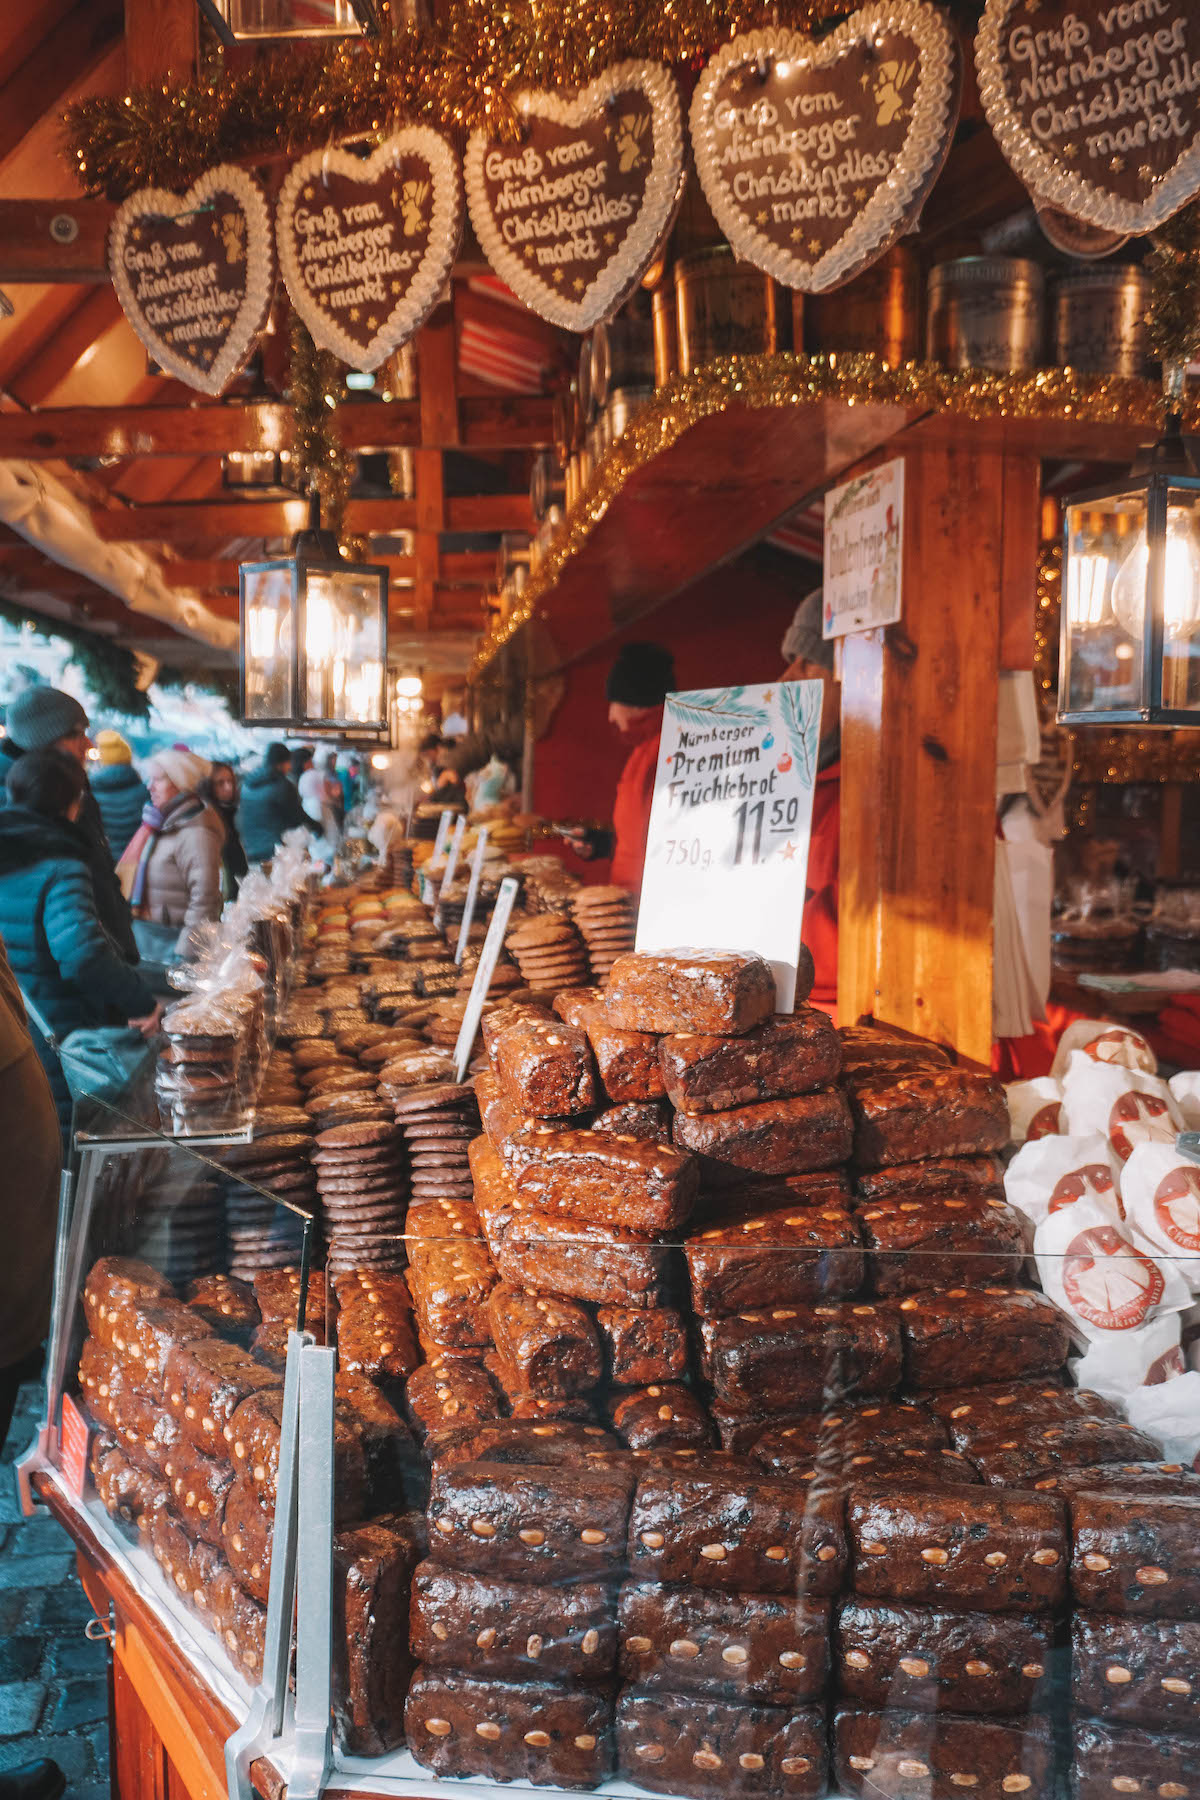 Früchtebrot at the Nuremberg Christmas Marget